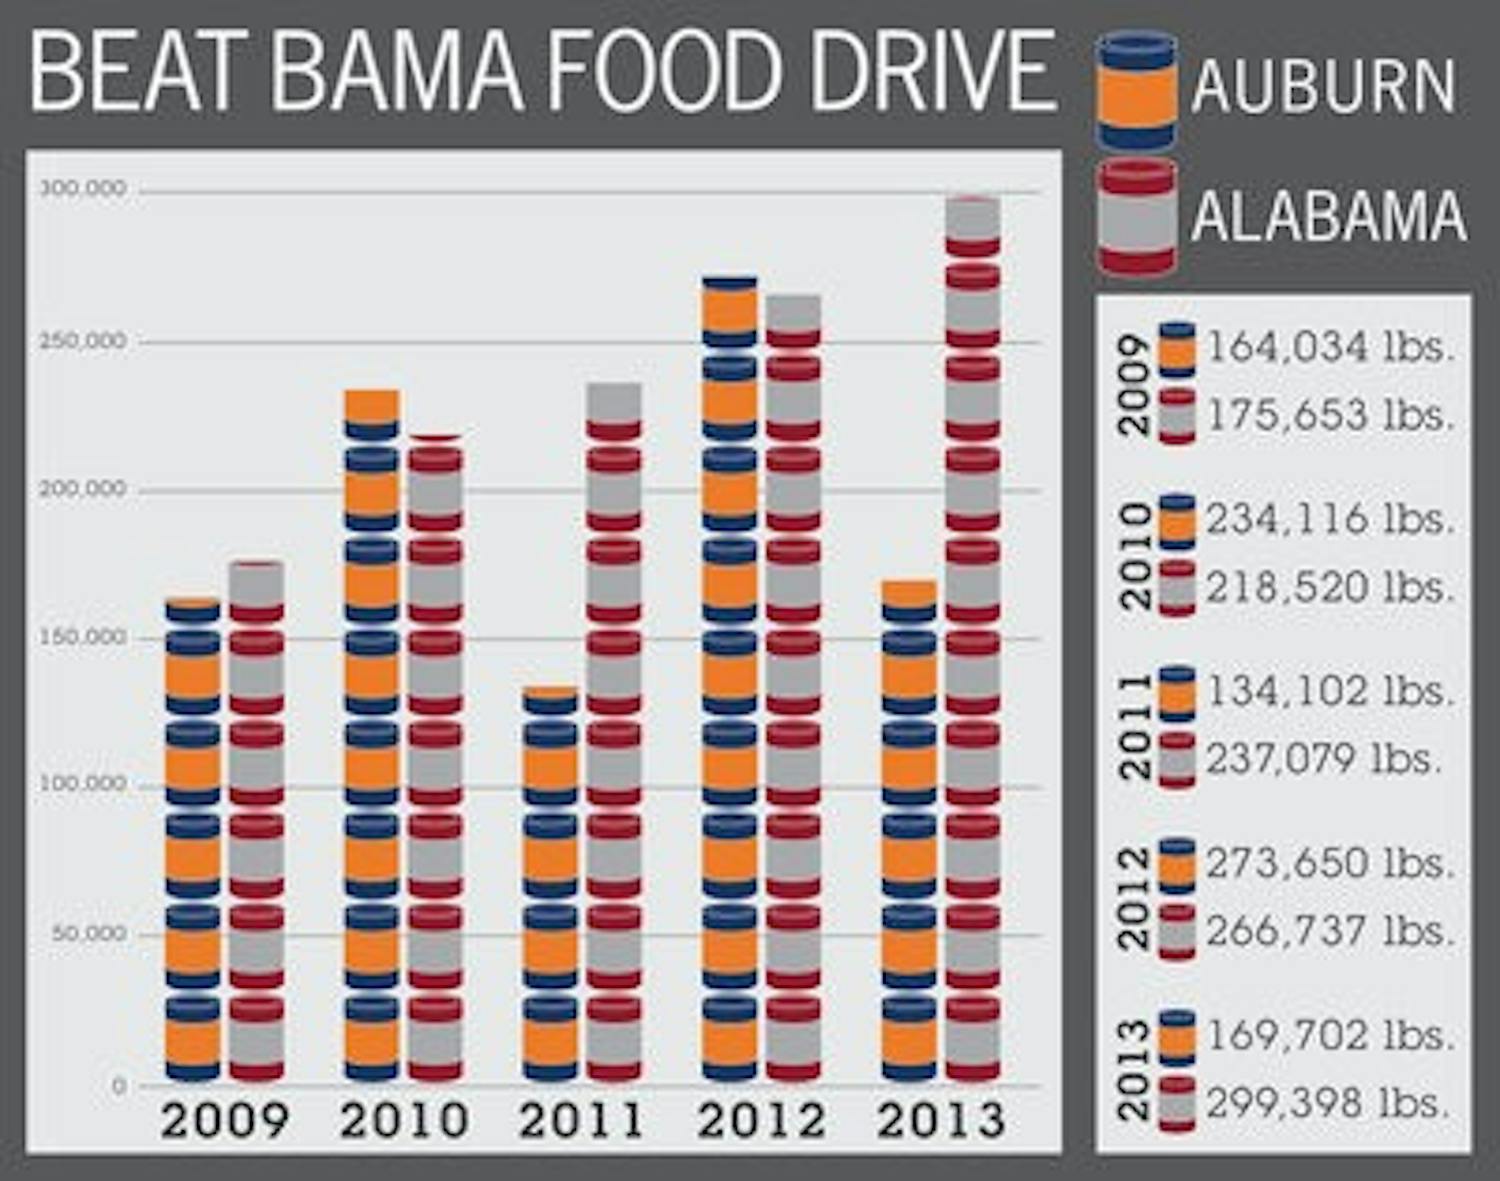 The Beat Bama Food Drive began in 1994, and over the course of 21 years has raised 4 million pounds of food for the Food Bank of East Alabama.